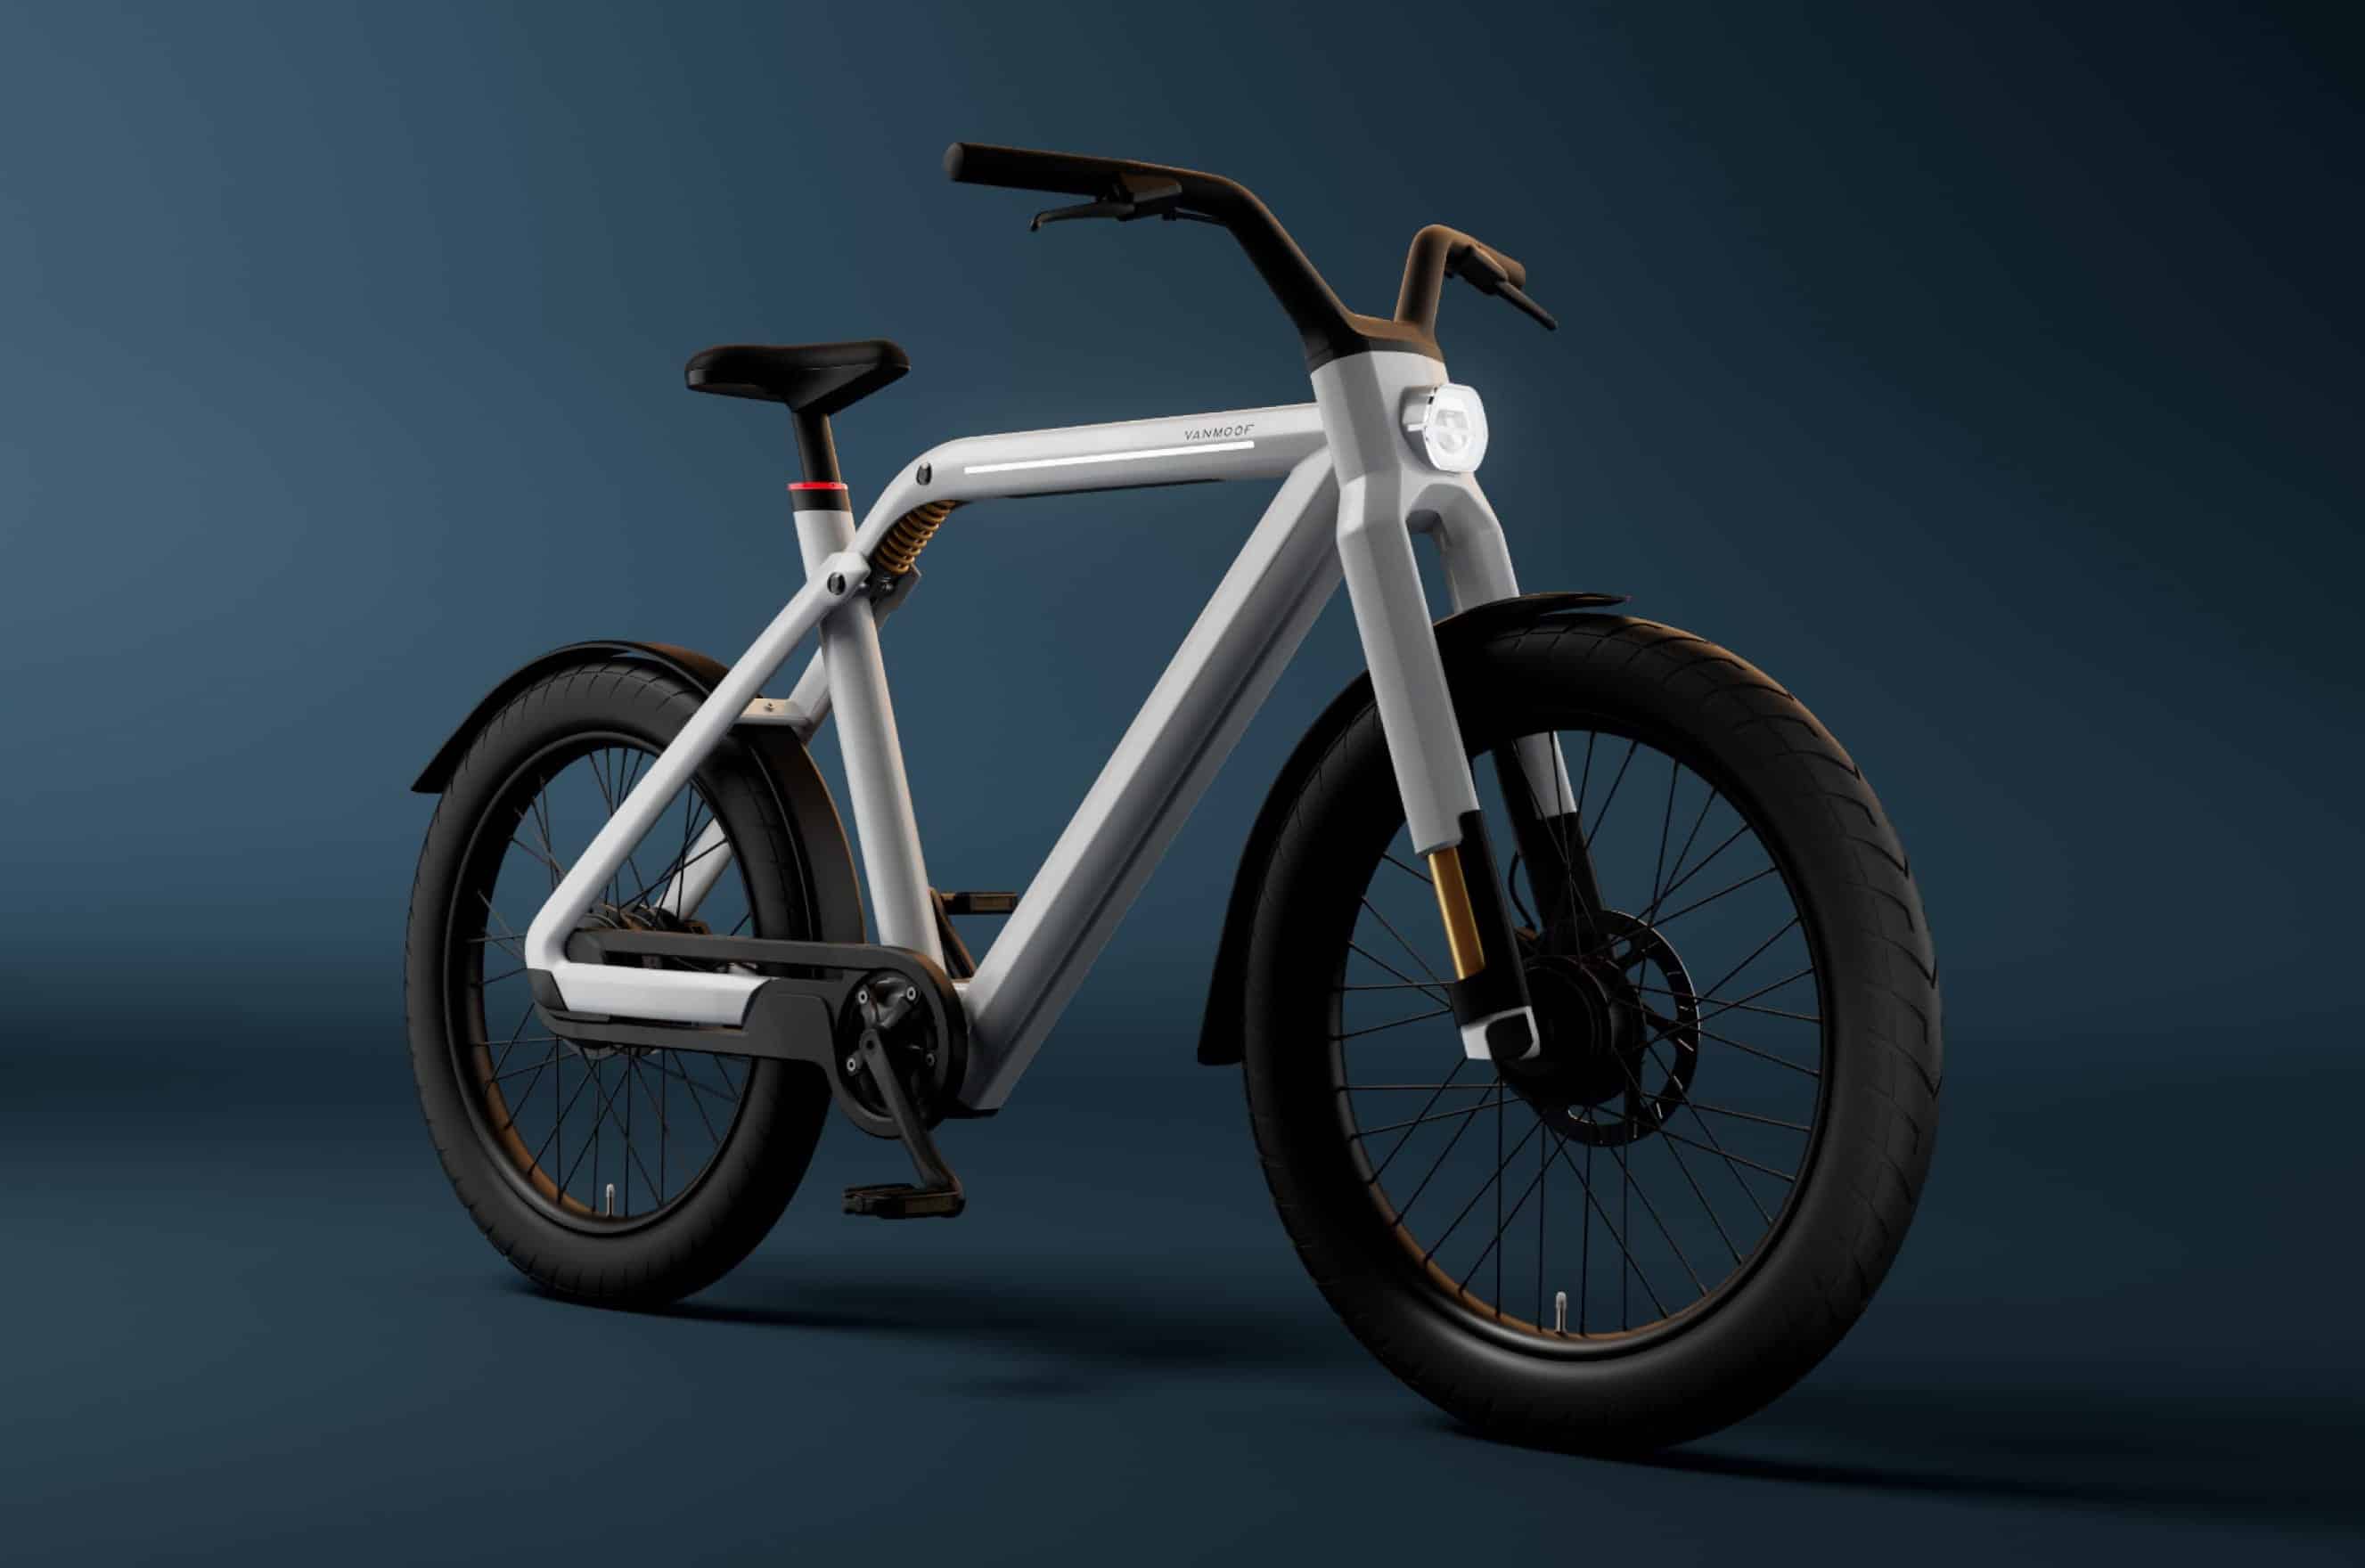 VanMoof: The impact and aftermath of a pioneering e-bike company